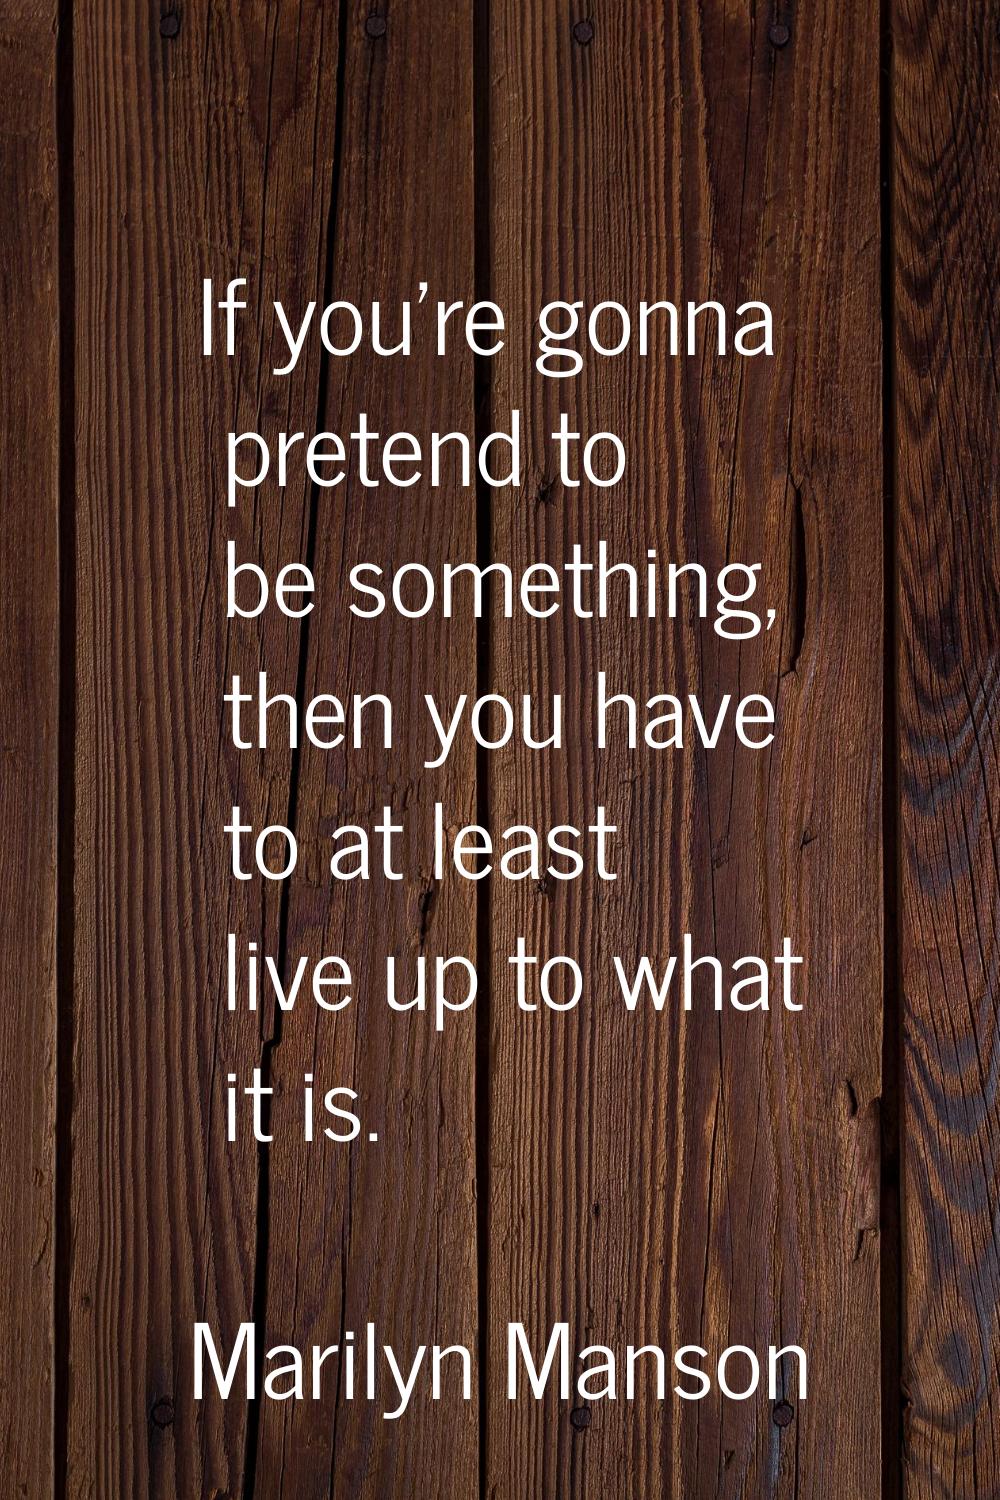 If you're gonna pretend to be something, then you have to at least live up to what it is.